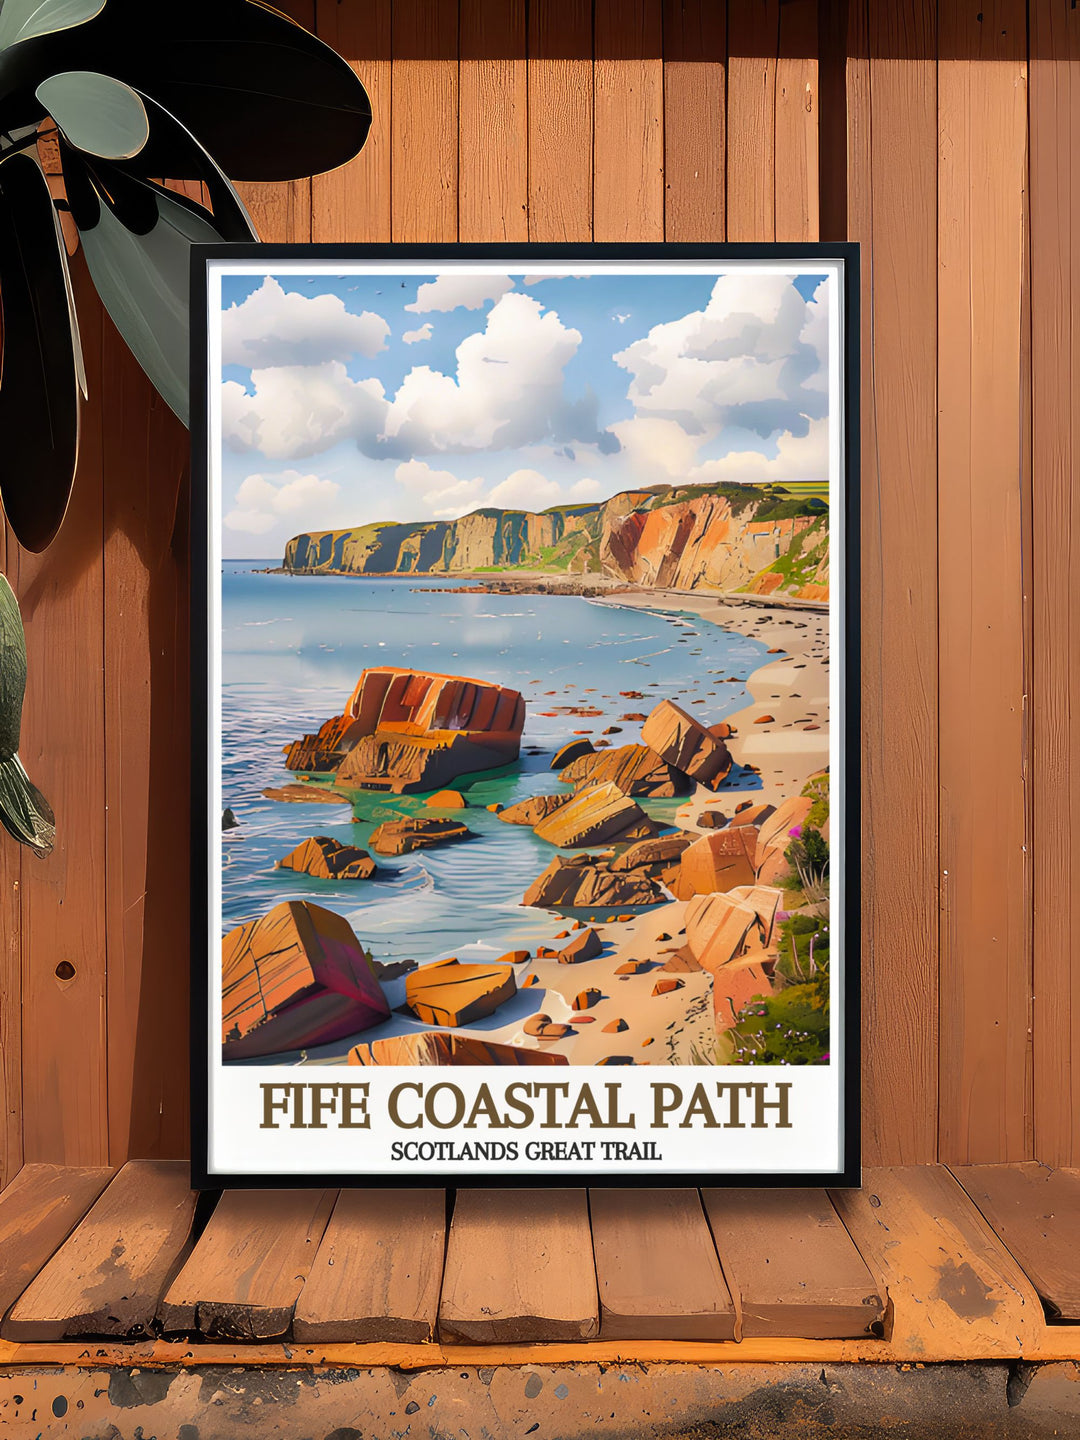 This travel poster of the Fife Coastal Path captures the dramatic beauty and serene environment of one of Scotlands most treasured natural landmarks, offering a glimpse into Scotlands stunning wilderness.